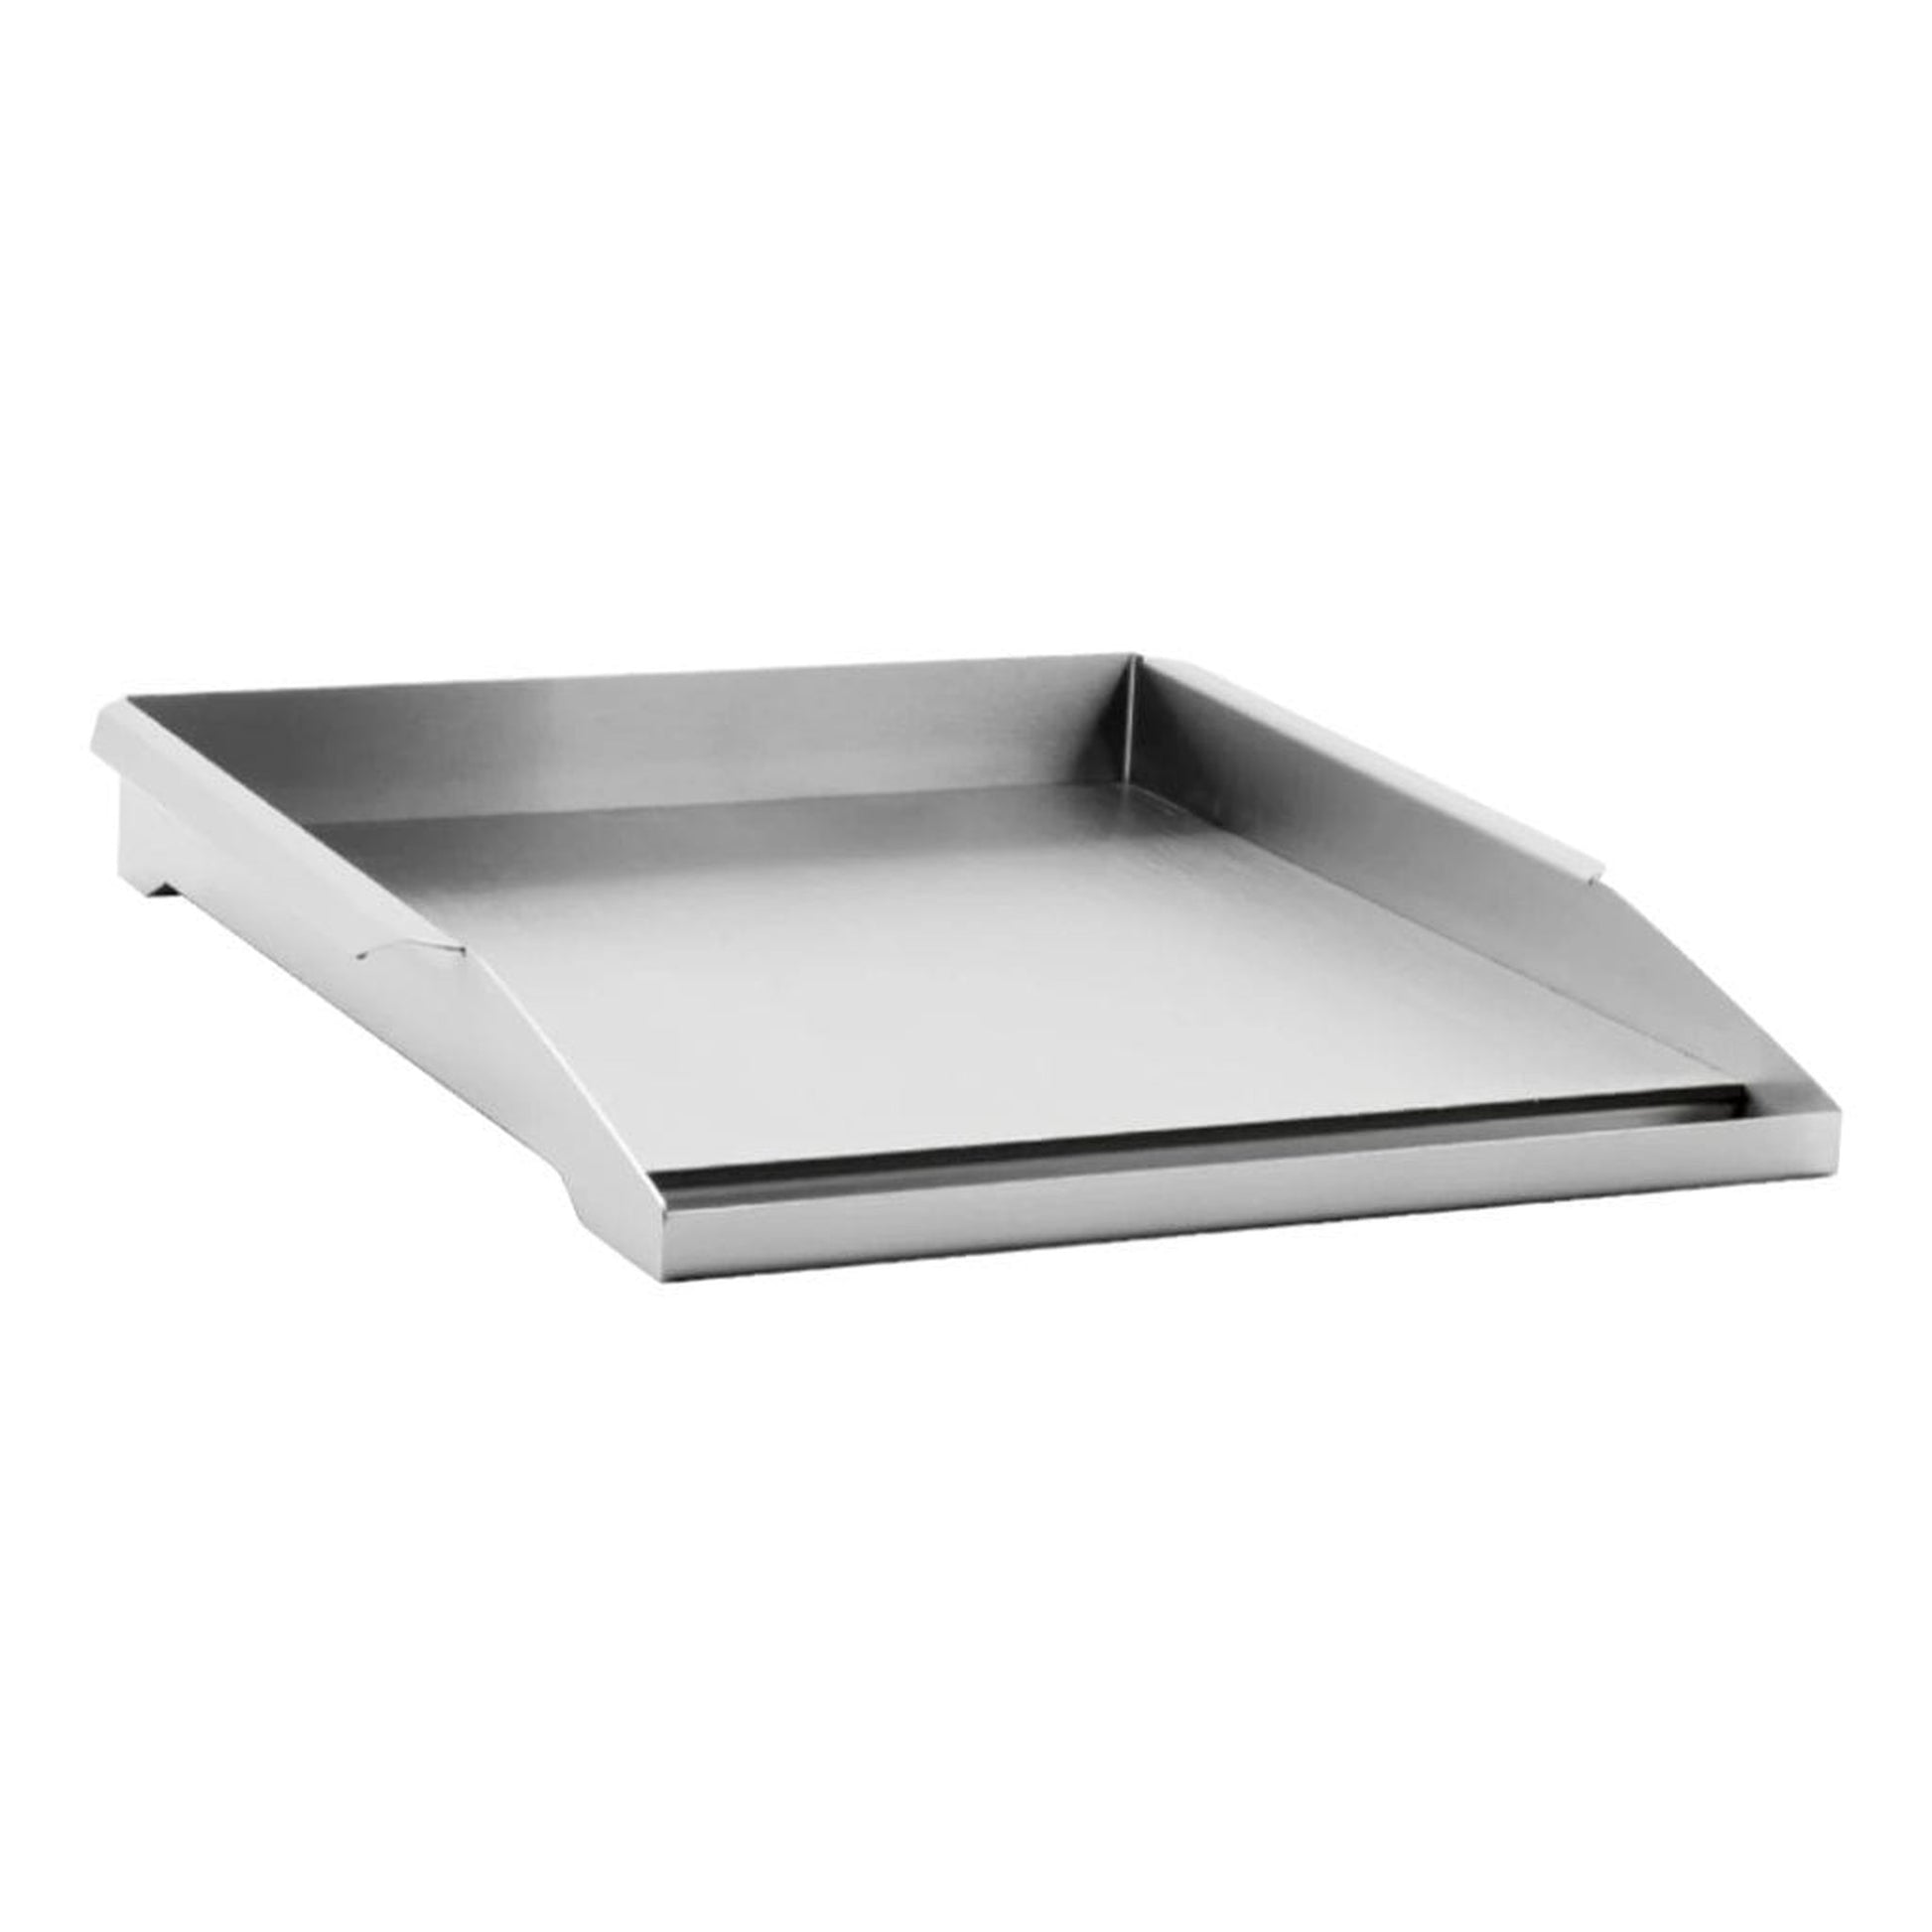 American Made Grills by Summerset 17" Stainless Steel Griddle Plate